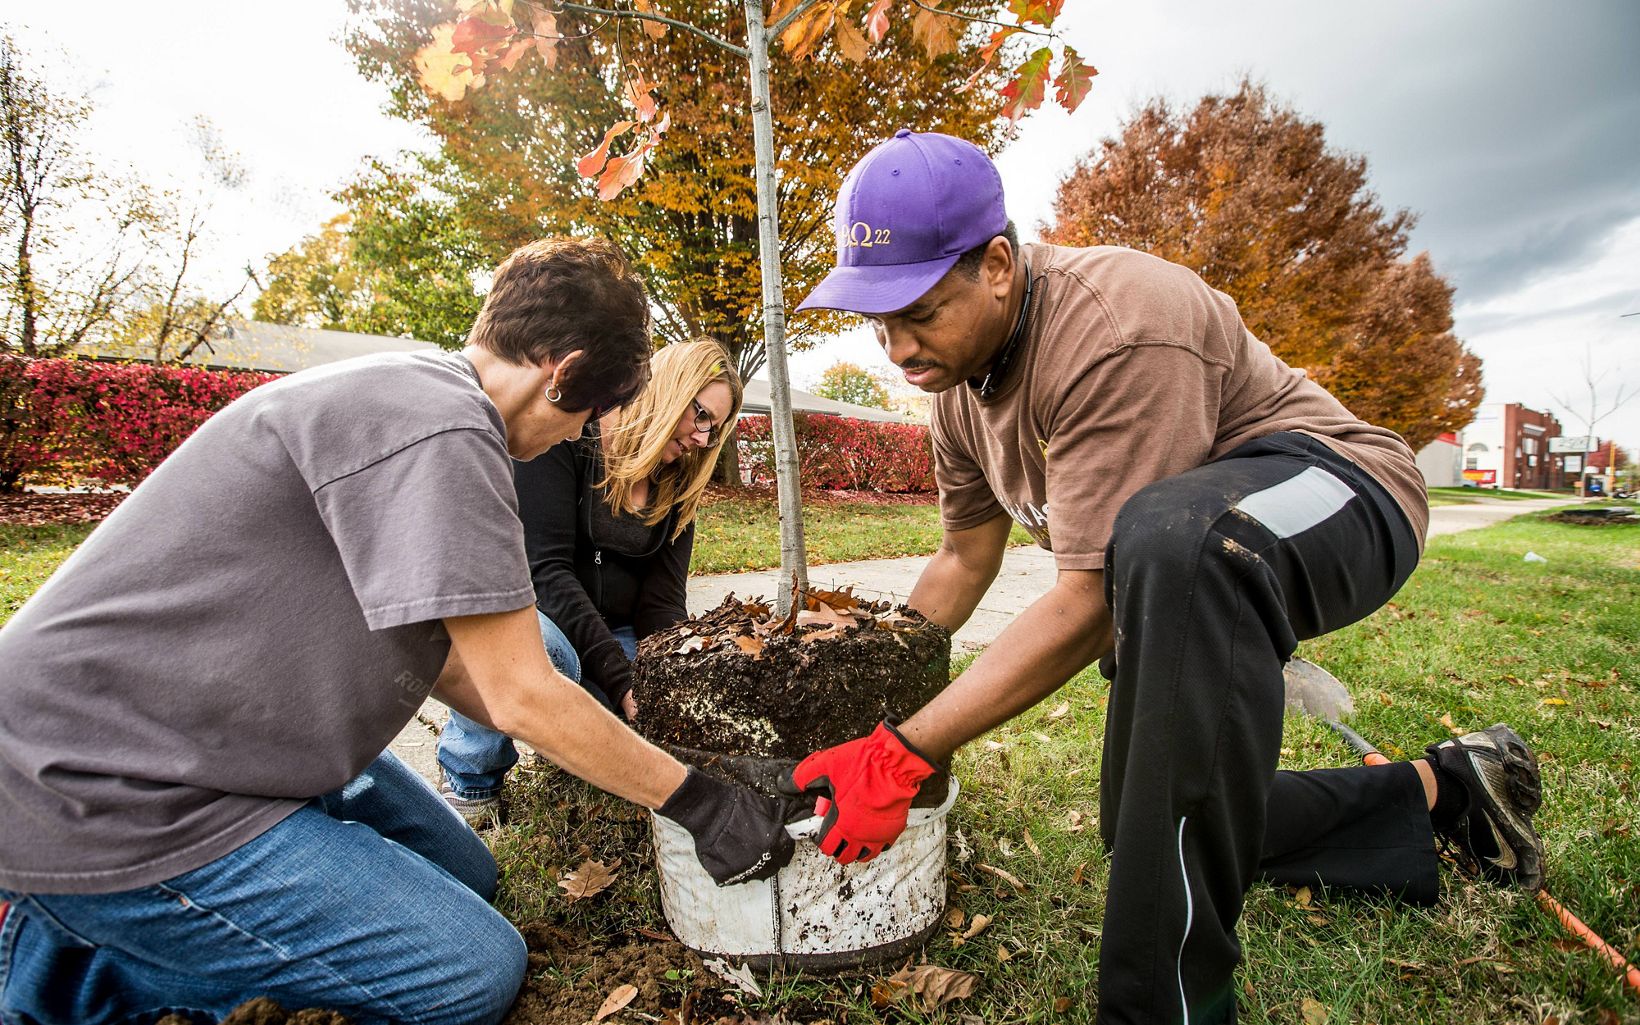 In coordination with generous sponsorships from UPS, The Nature Conservancy, Brown-Forman, and Brightside planted trees for a community-wide planting day.